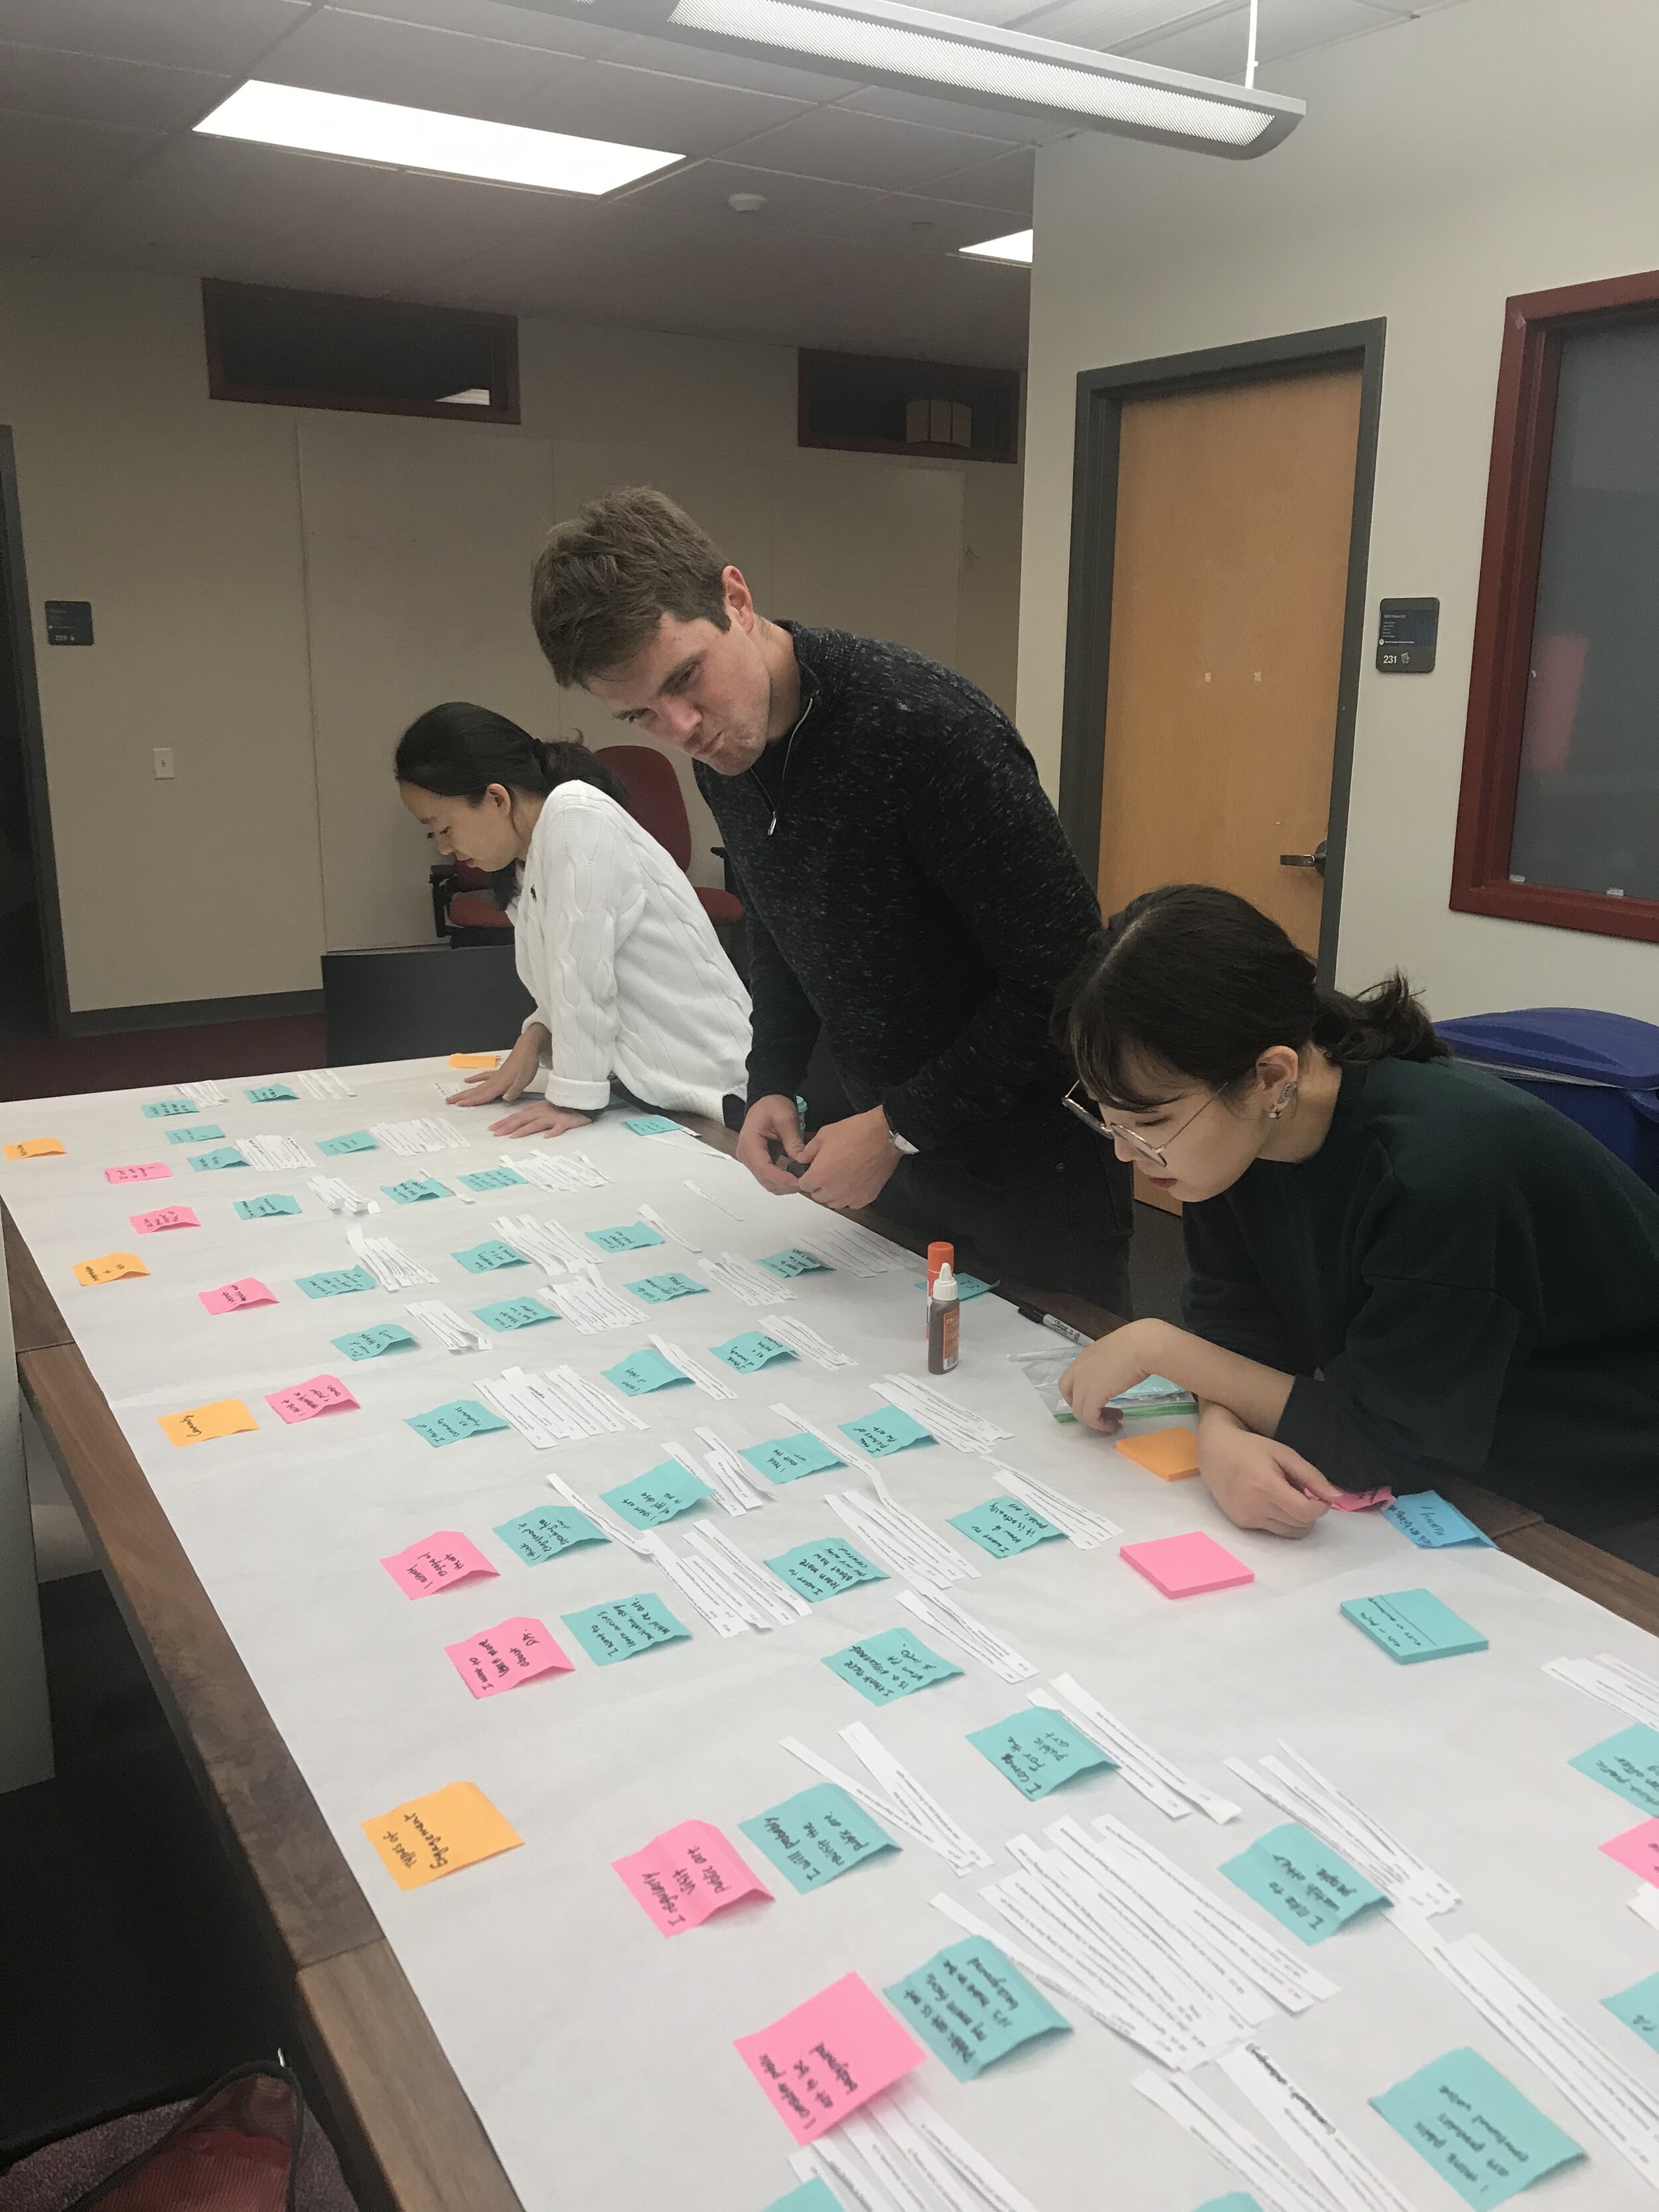 Affinity mapping the interpretation notes